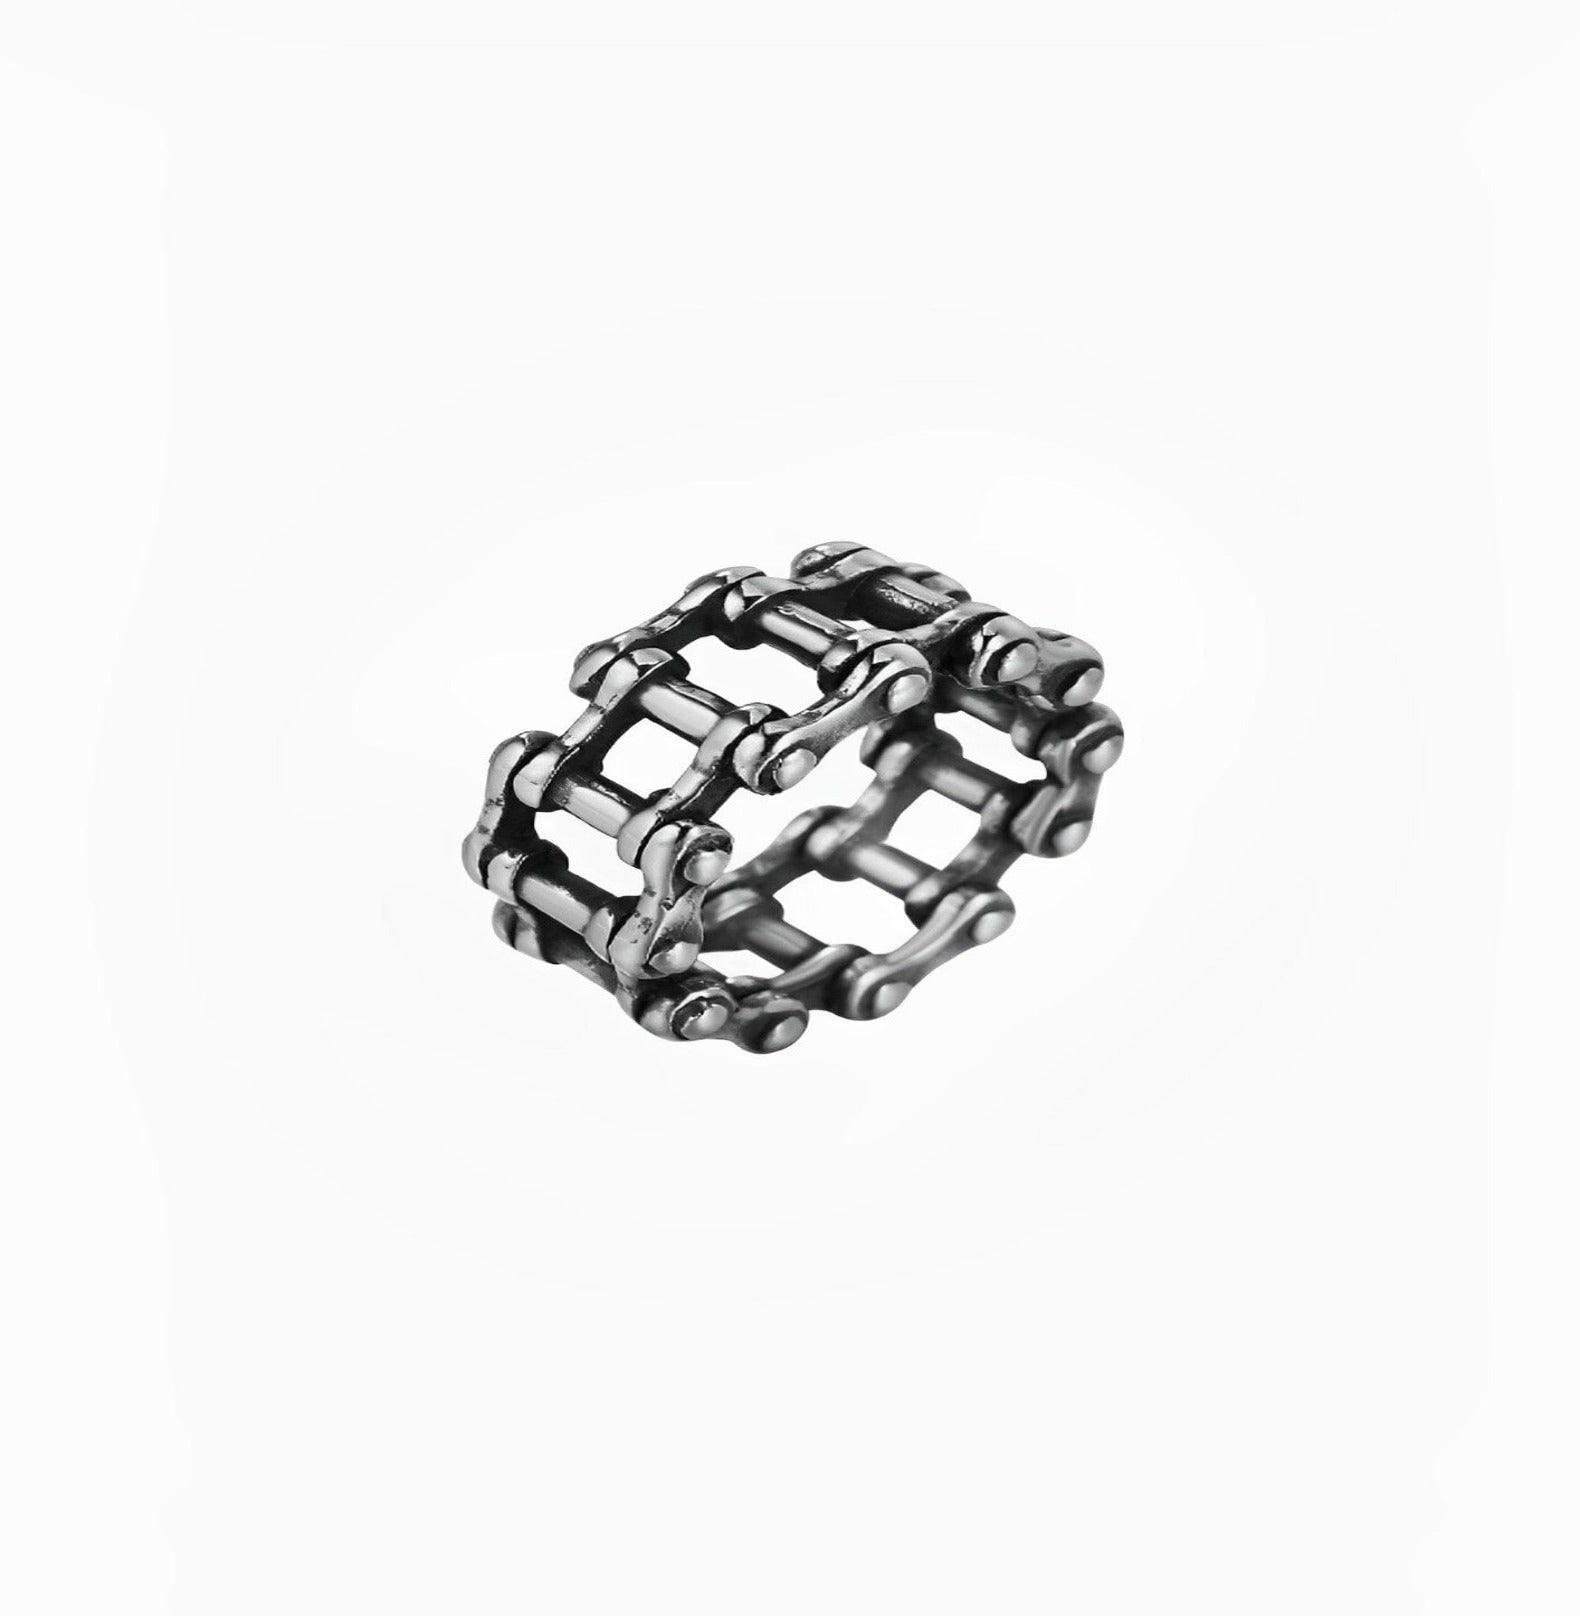 ZOVALI RING ring Yubama Jewelry Online Store - The Elegant Designs of Gold and Silver ! 